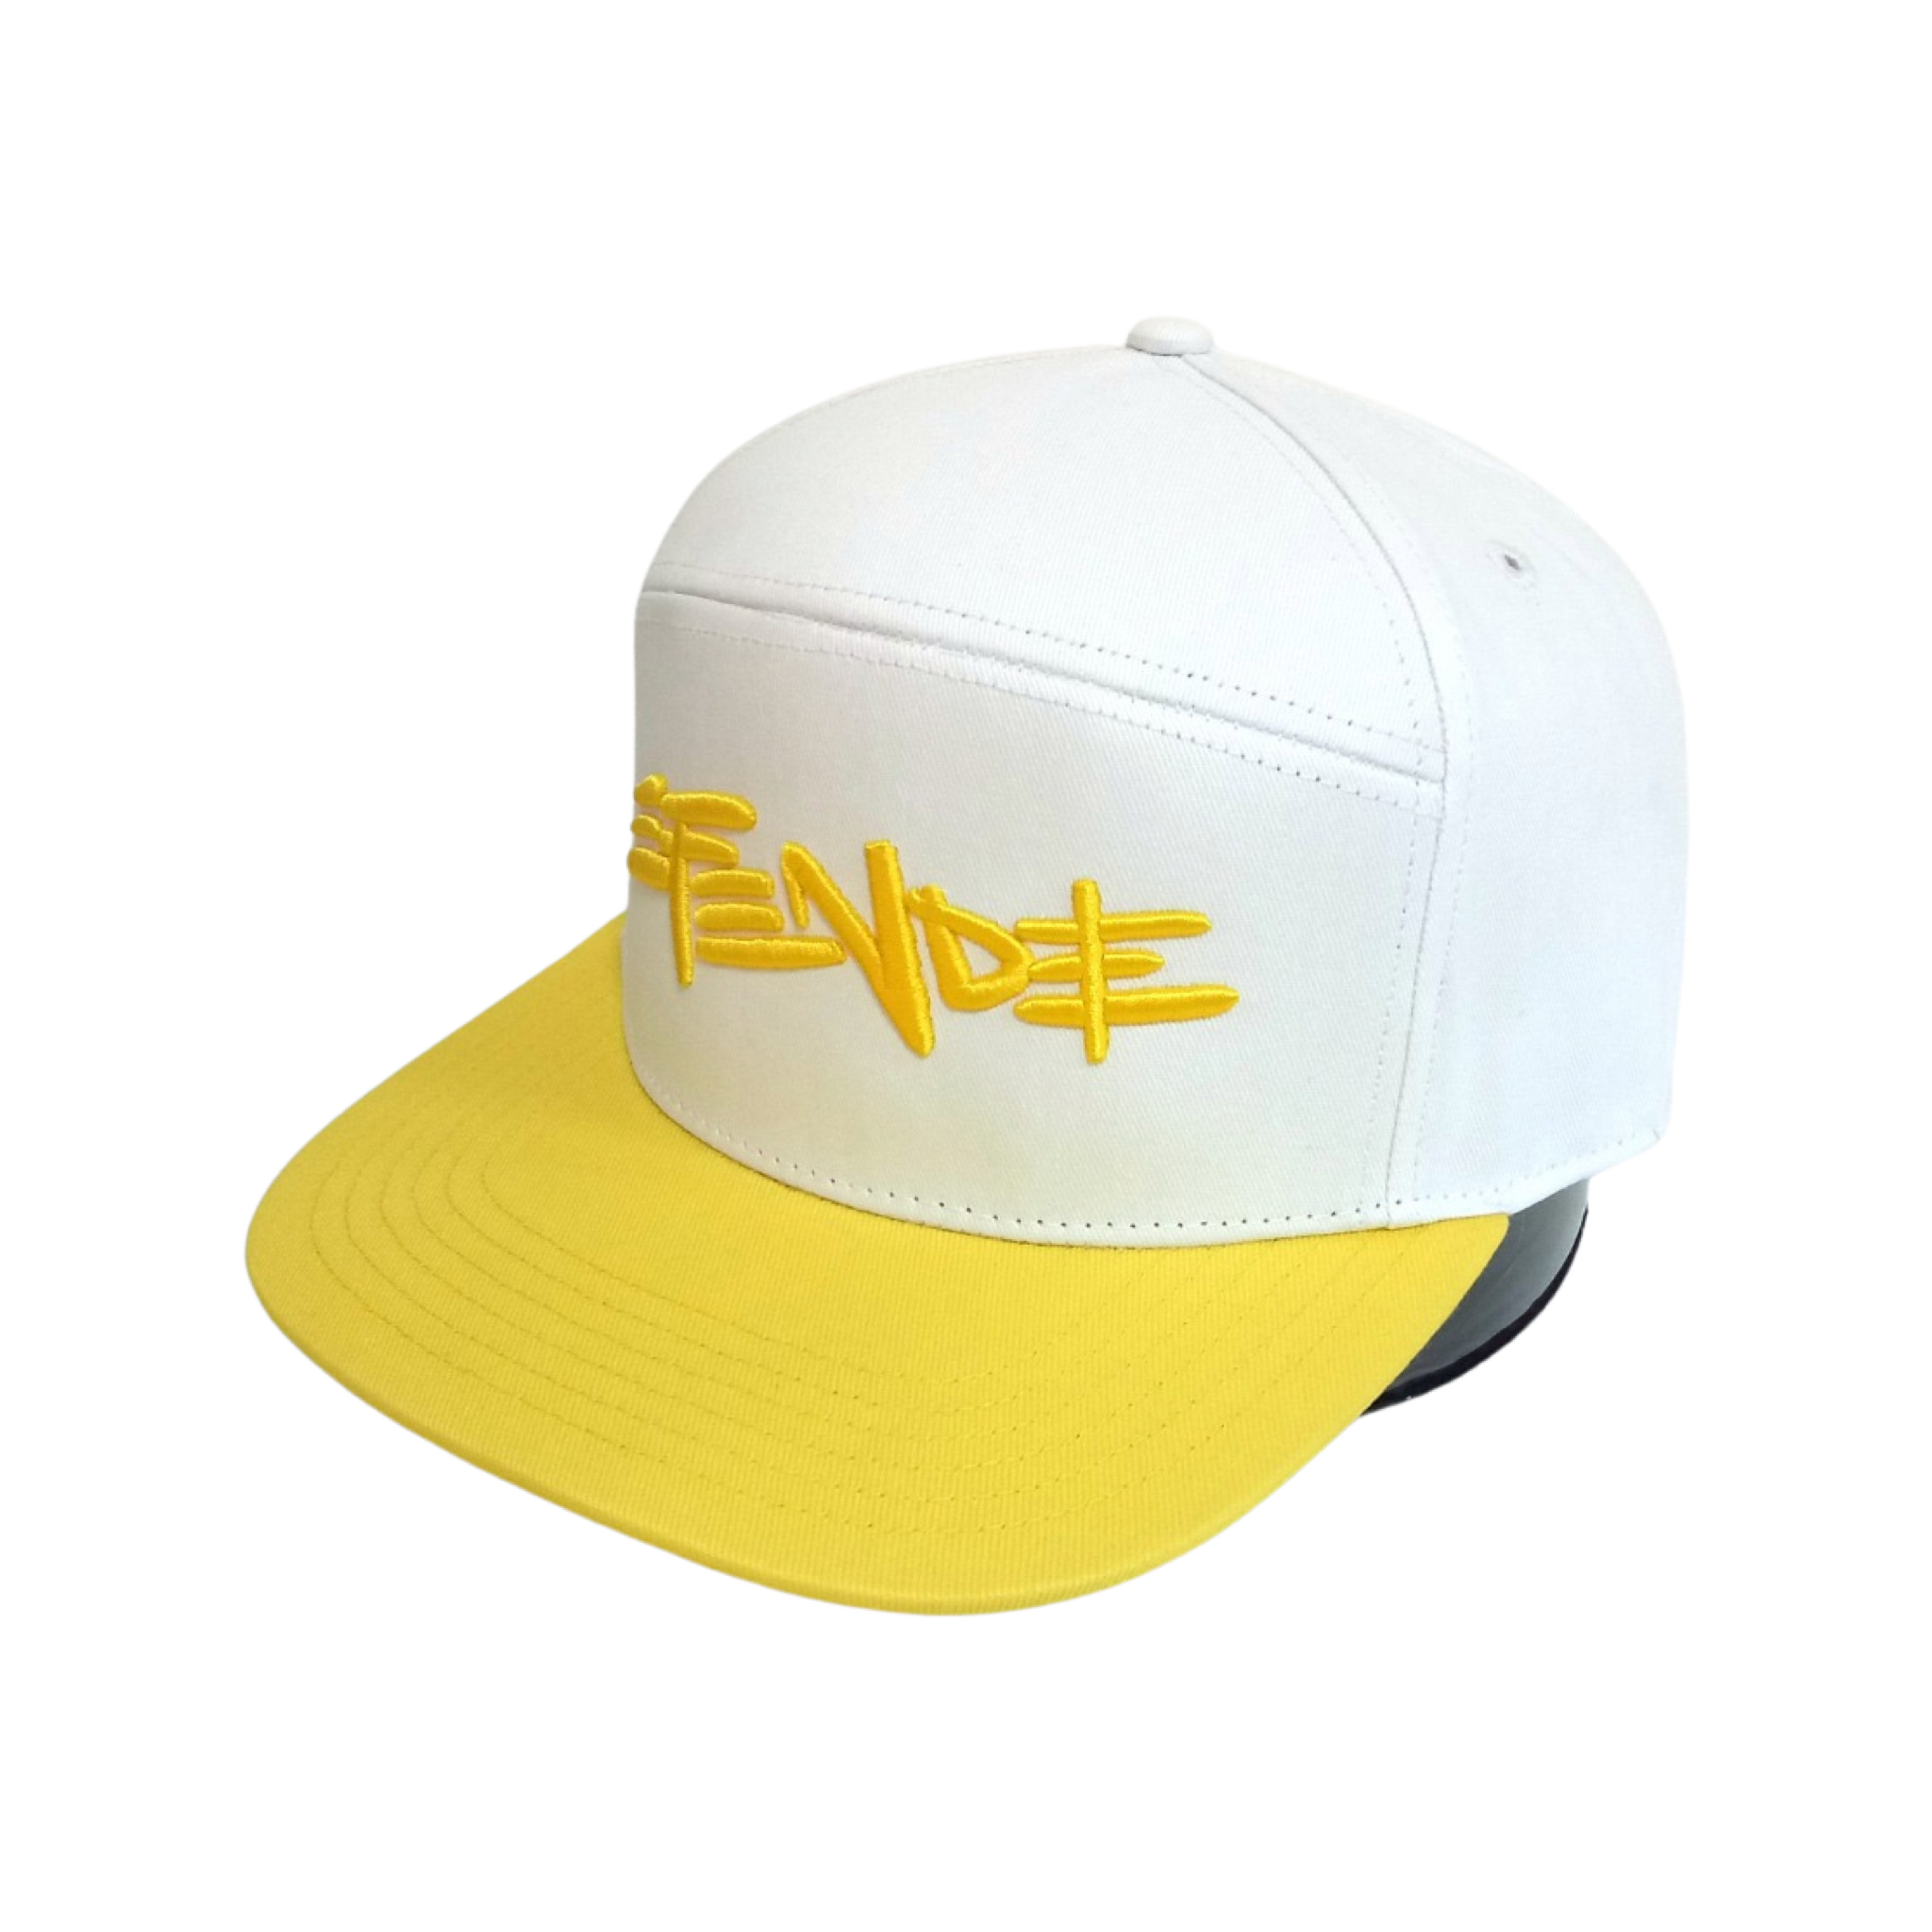 EFENDEE 7 Panel Hat - Yellow and White